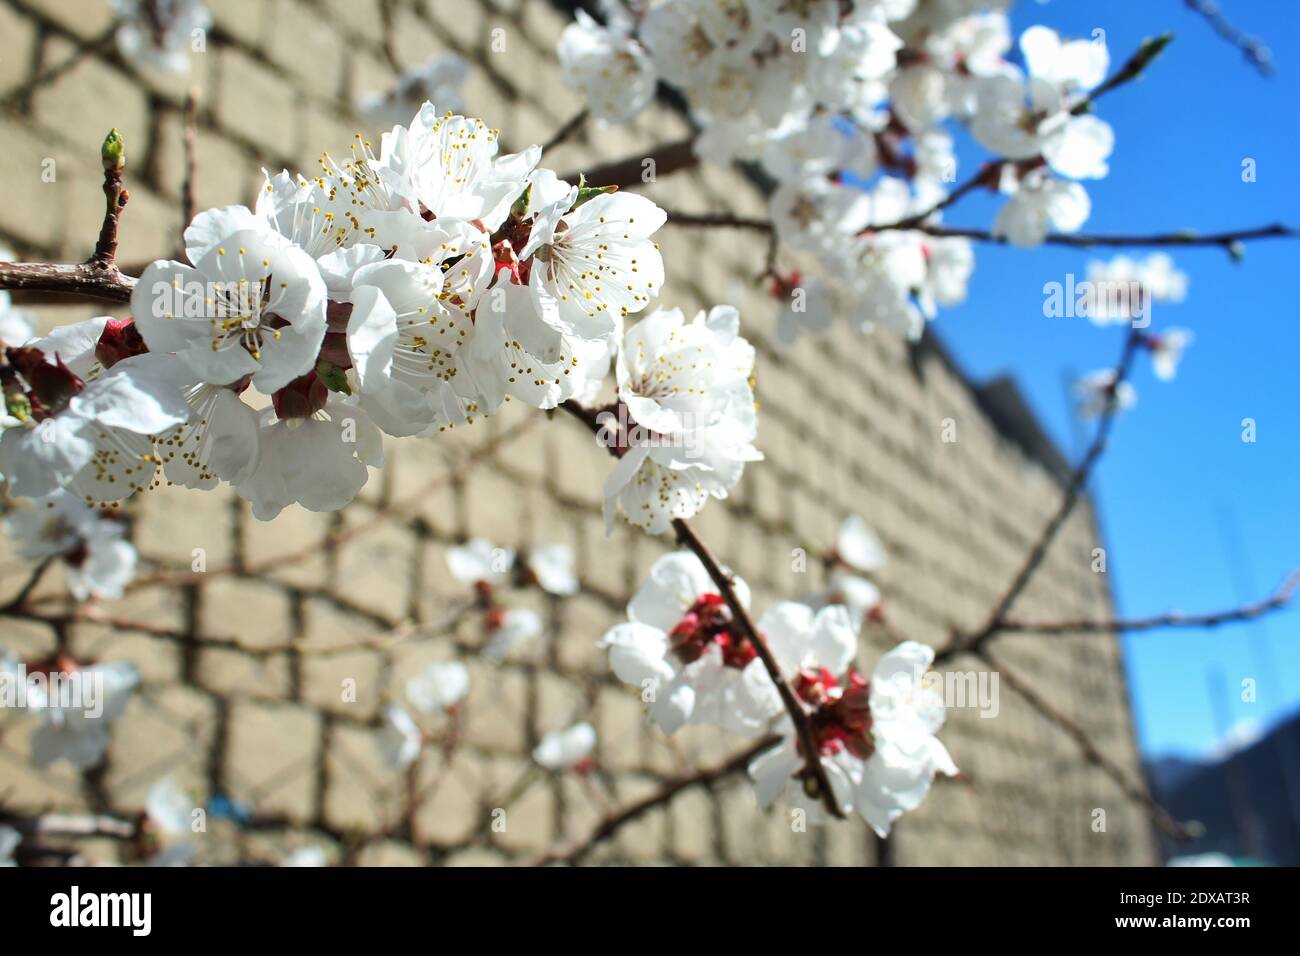 Apricot Tree Branches With A Blooming Apricot Flowers In The Month Of April Stock Photo Alamy